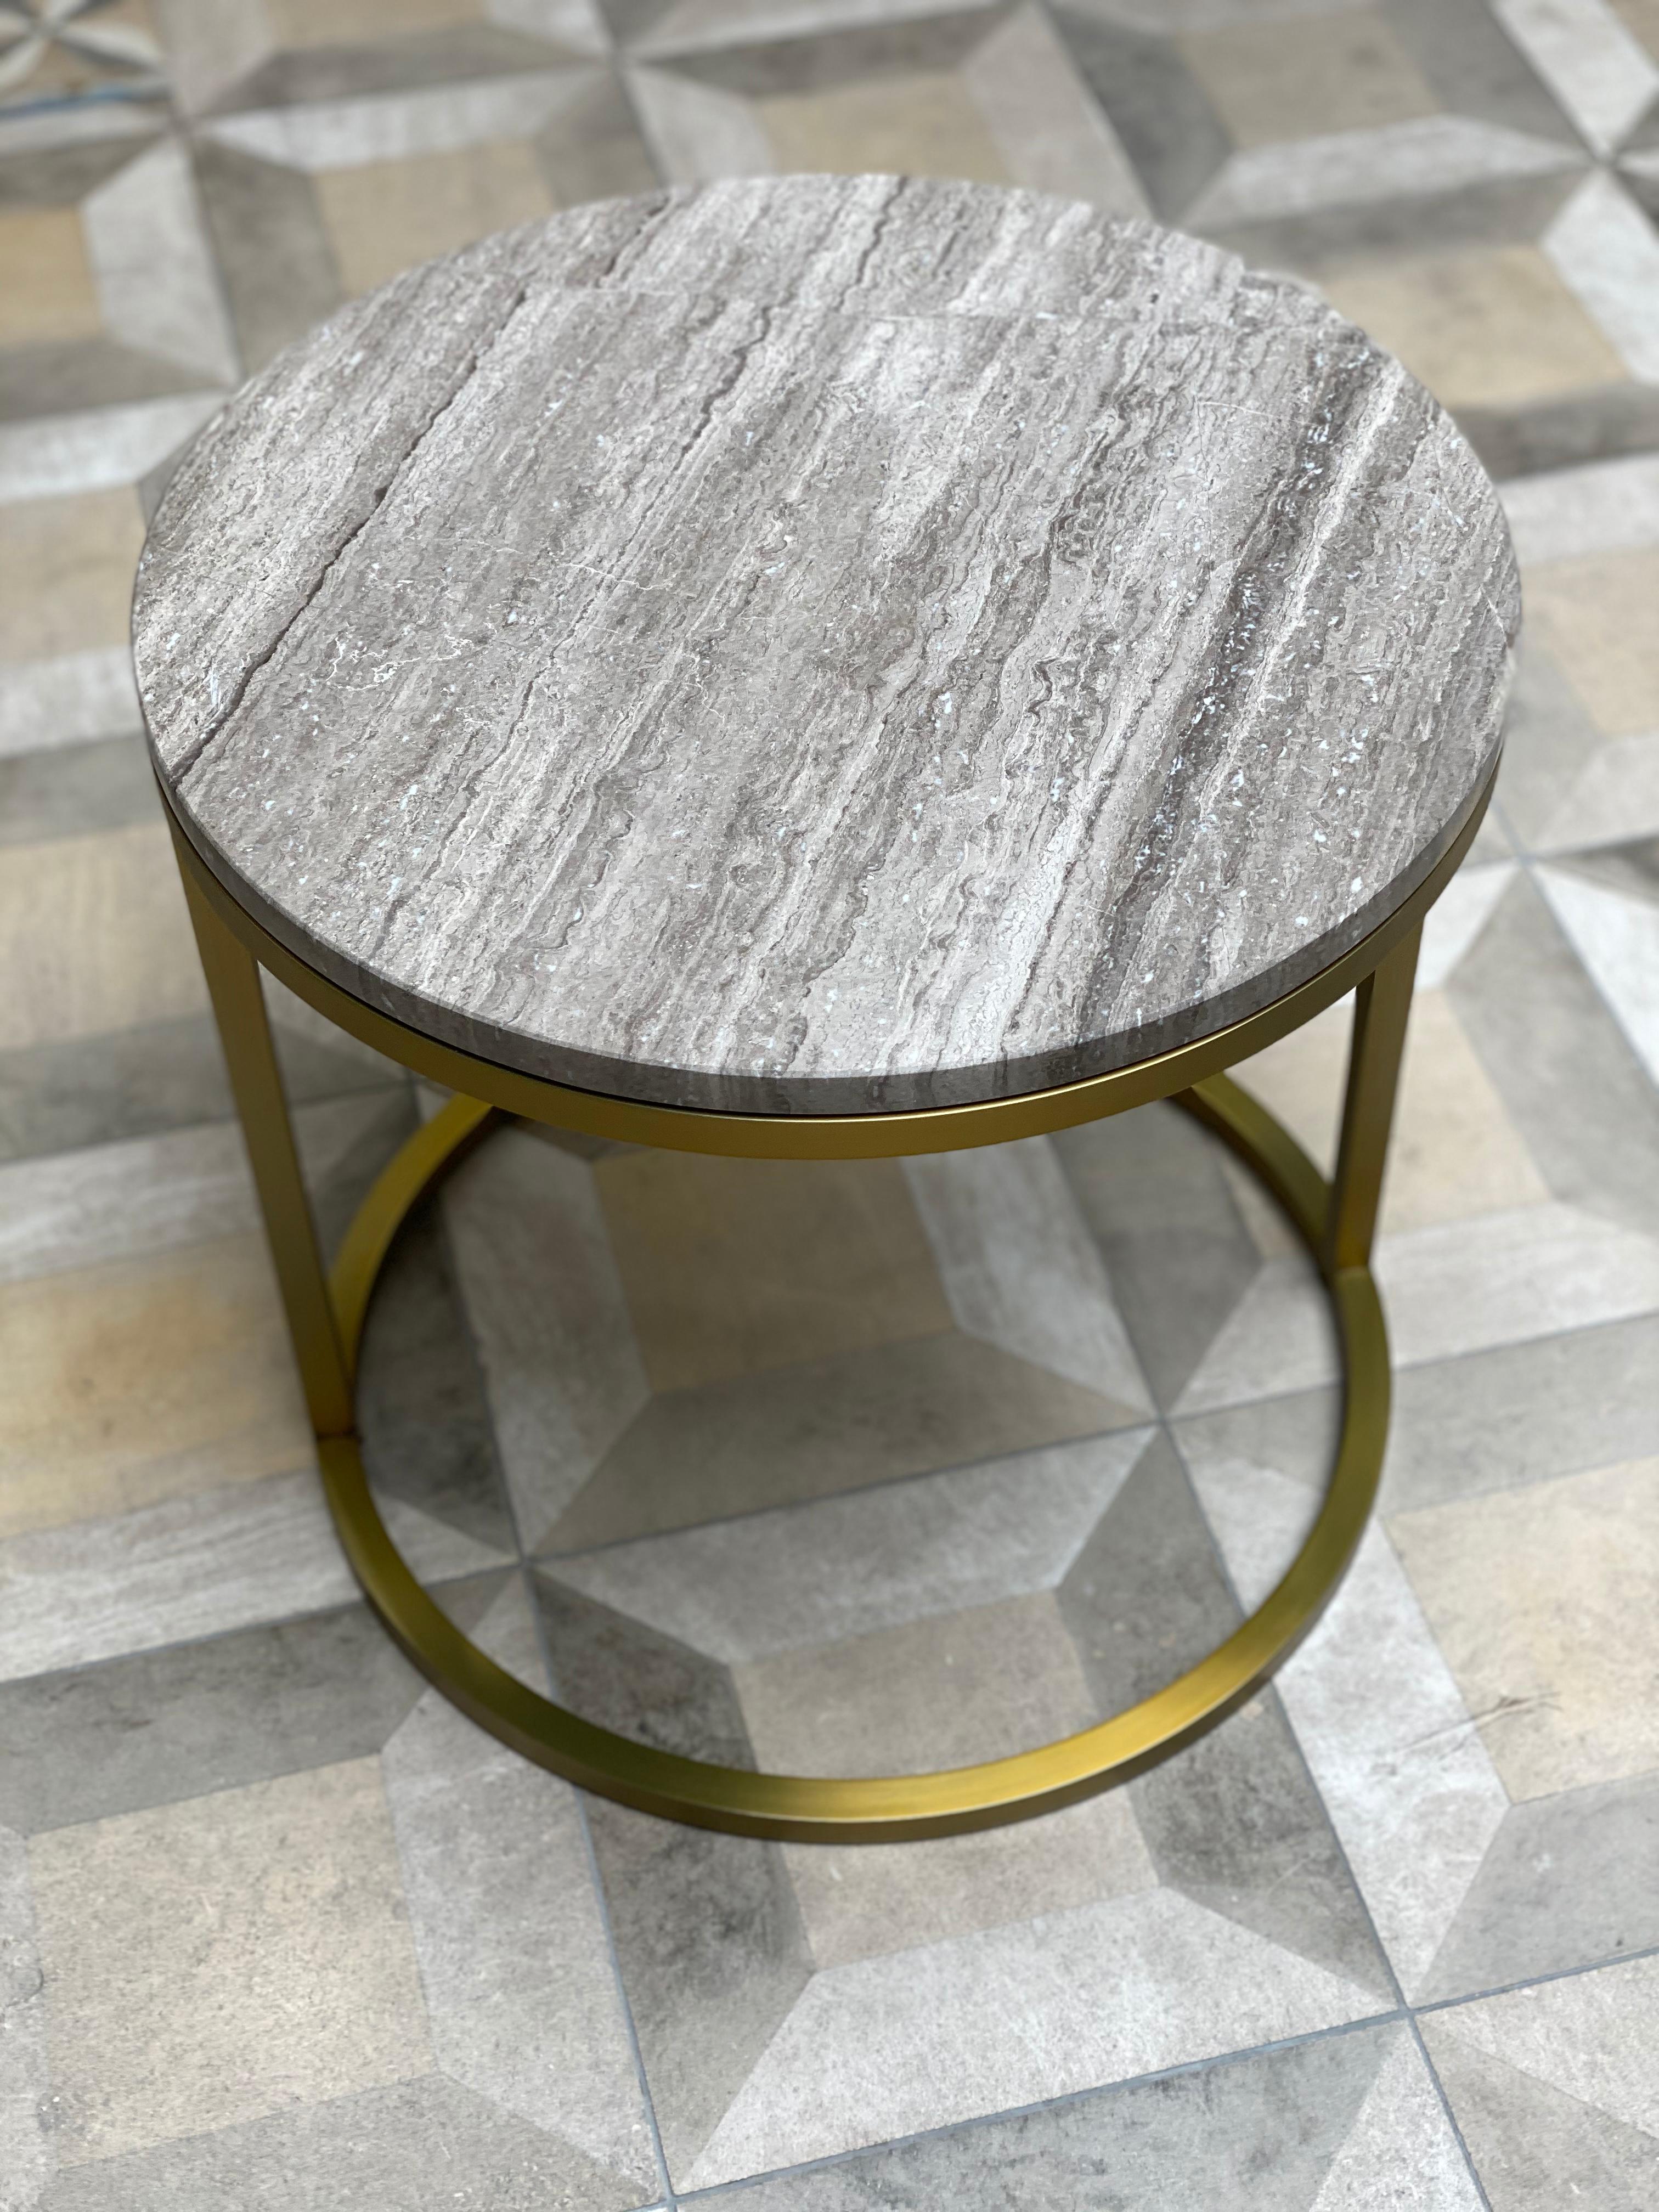 Designing small pieces of luxury furniture that are suitable for smaller homes is crucial in maximizing both functionality and aesthetics in limited spaces. The Diana round coffee table is a perfect example of this philosophy, featuring a compact